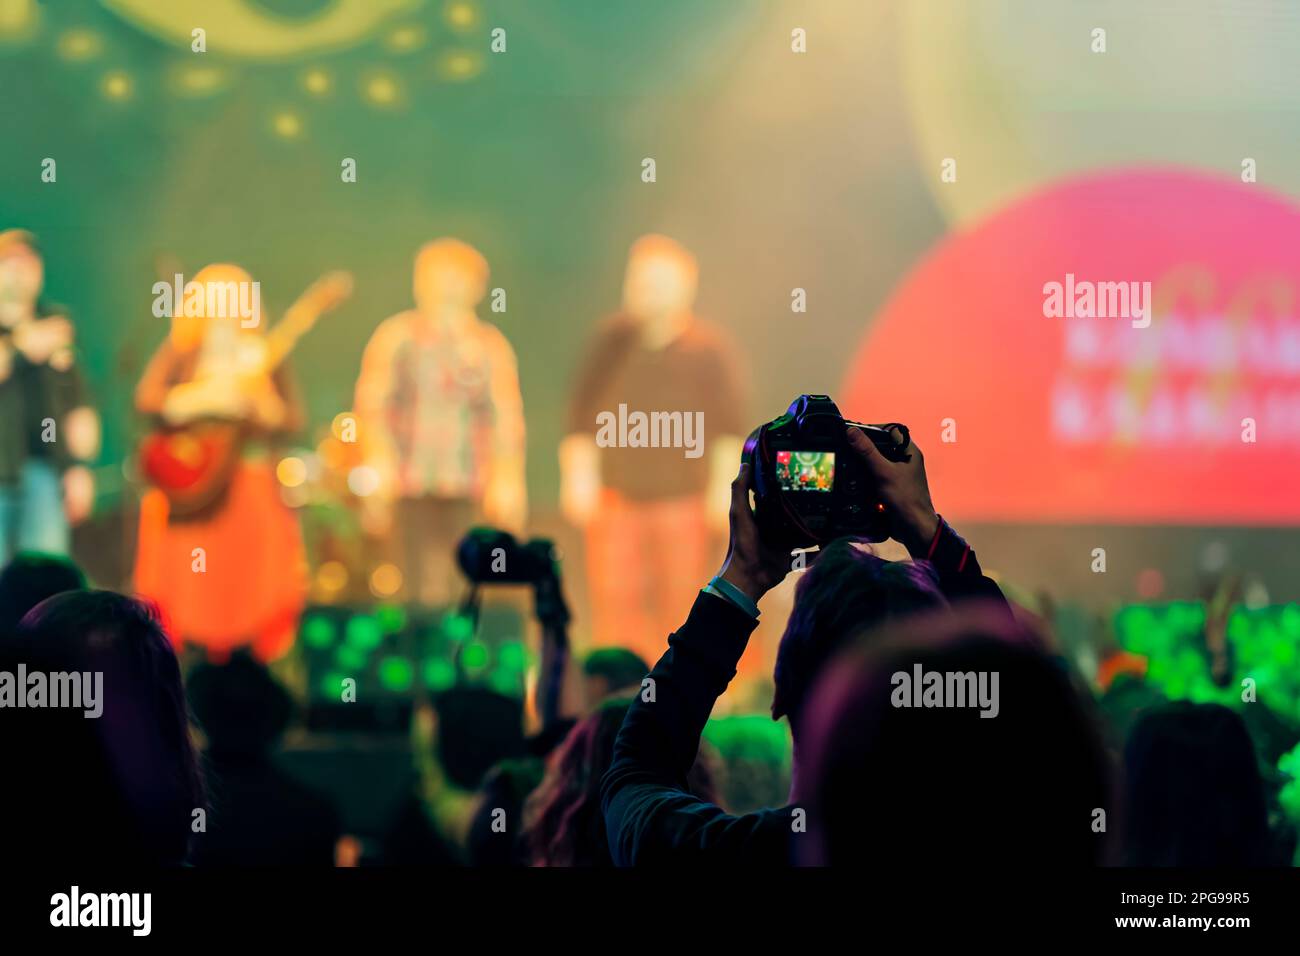 Silhouette of spectator, photographer taking picture with camera at concert with crowd people. Bright colorful light by stage lights Stock Photo